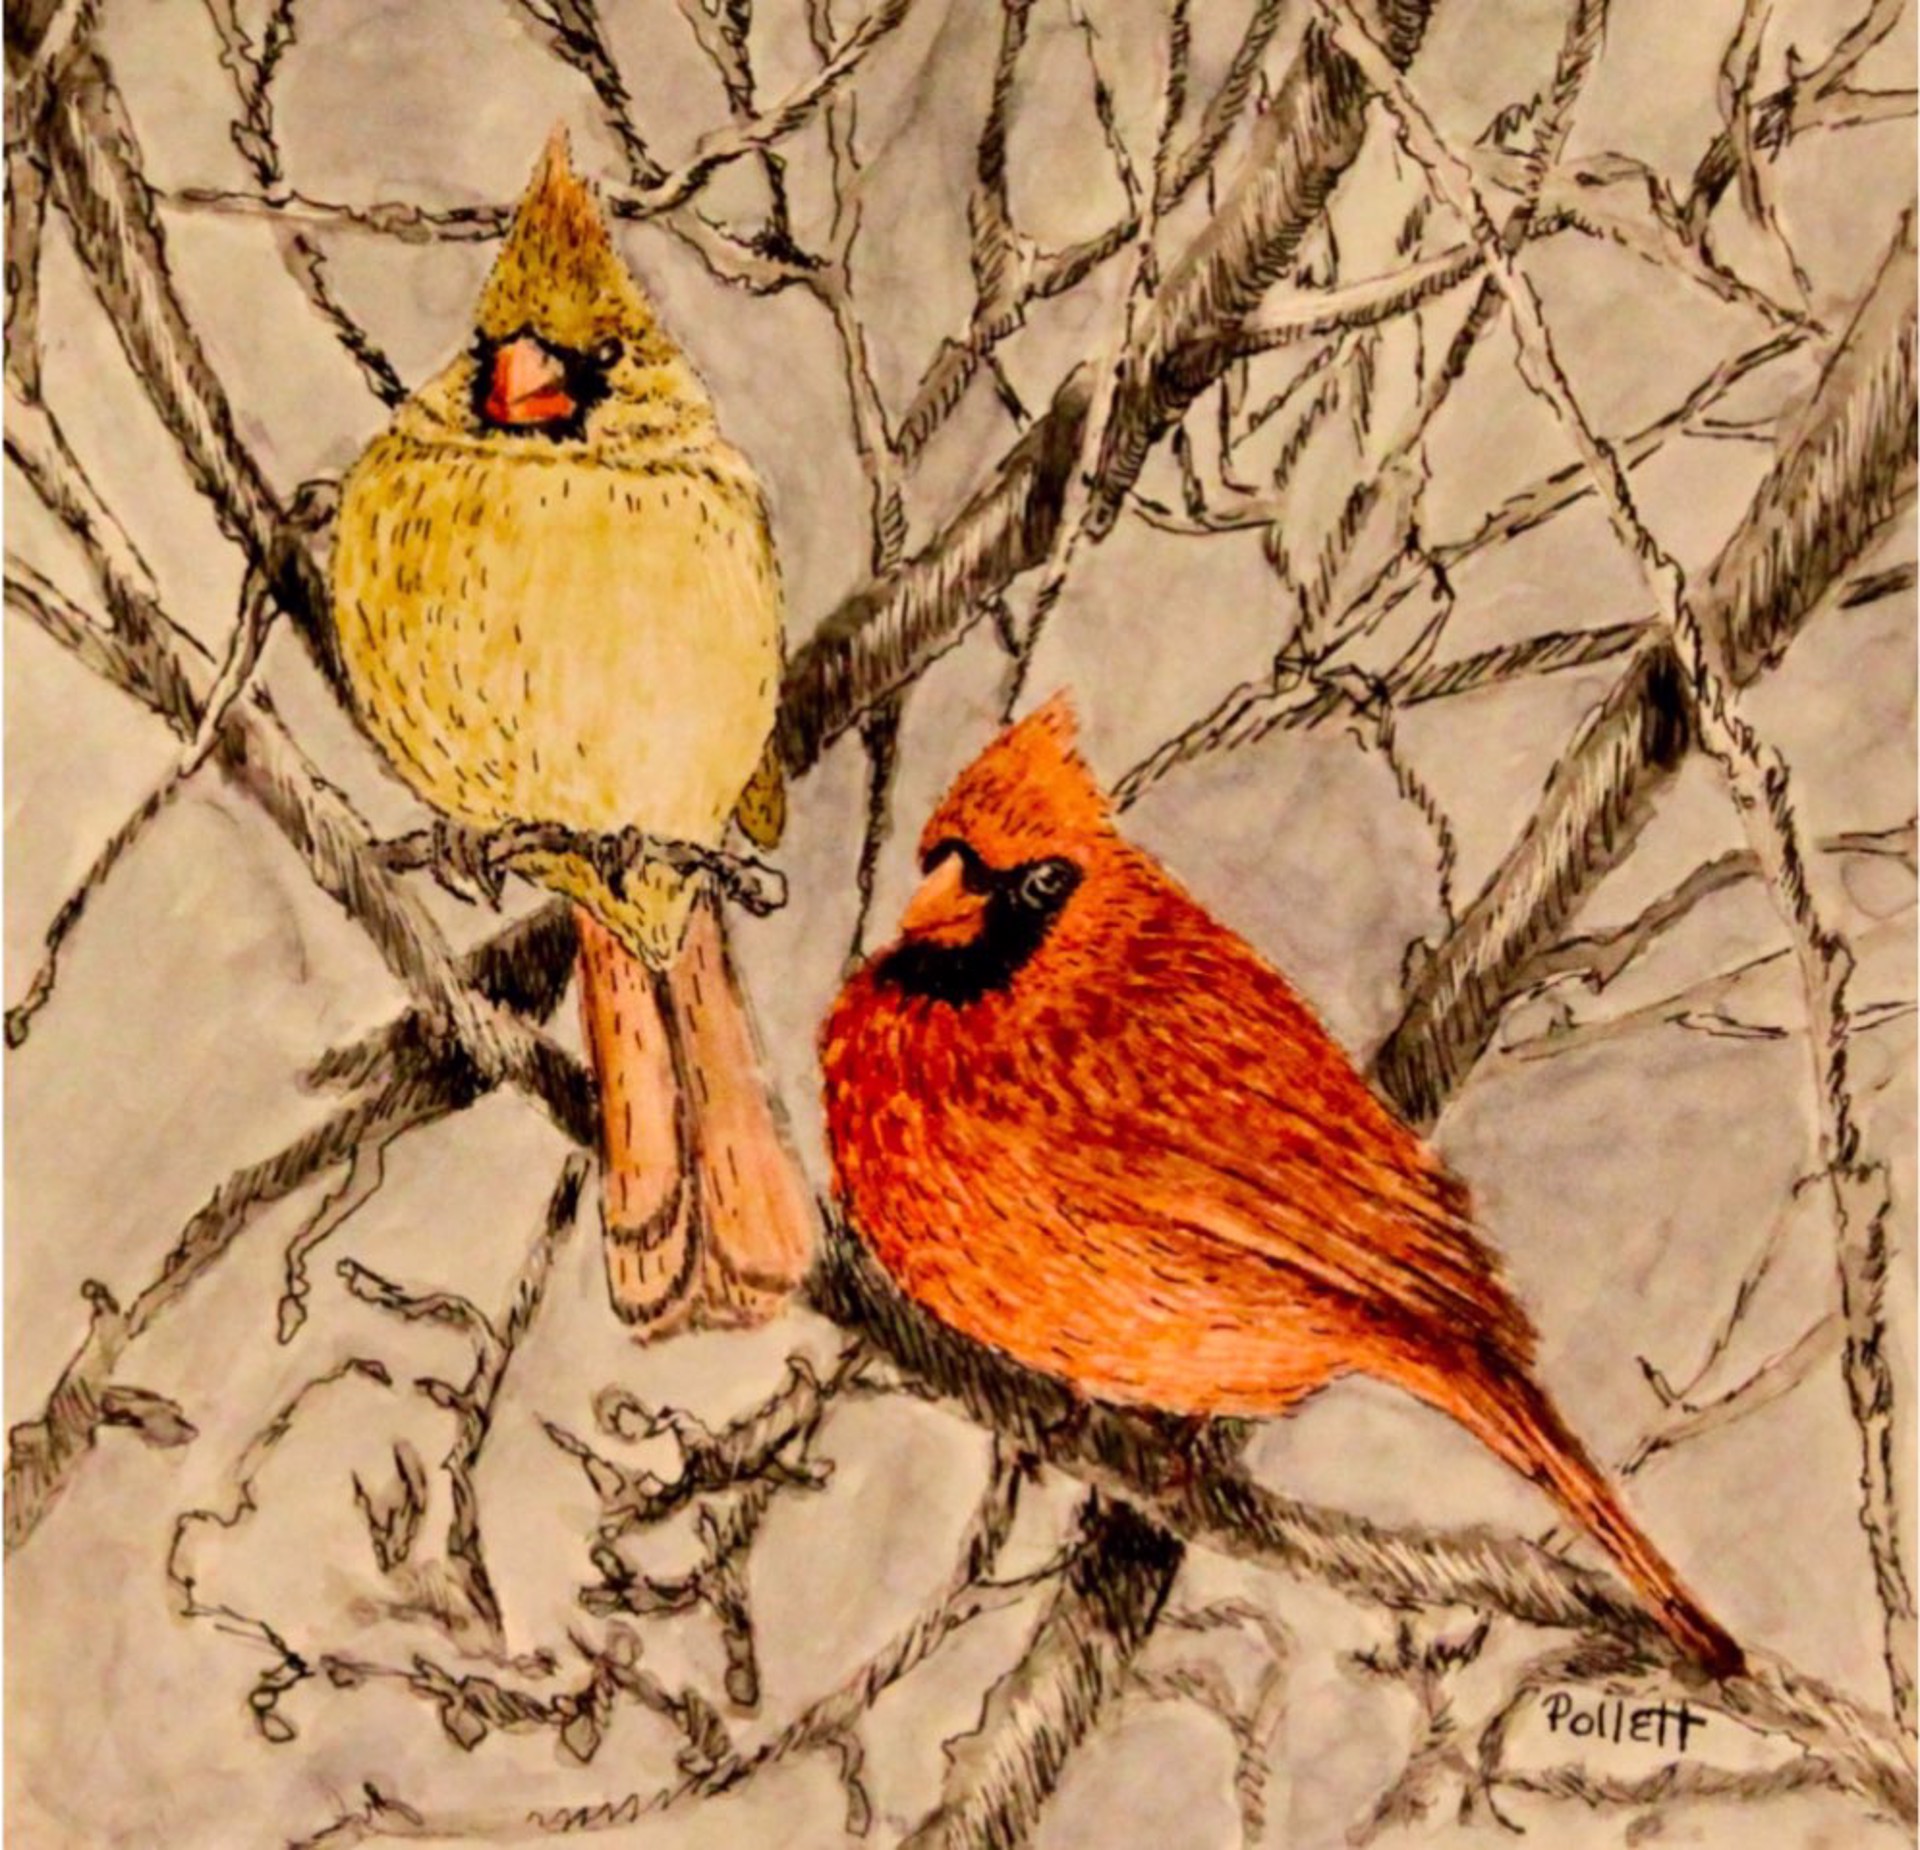 Pair  of Cardinals by Cynthia Pollett